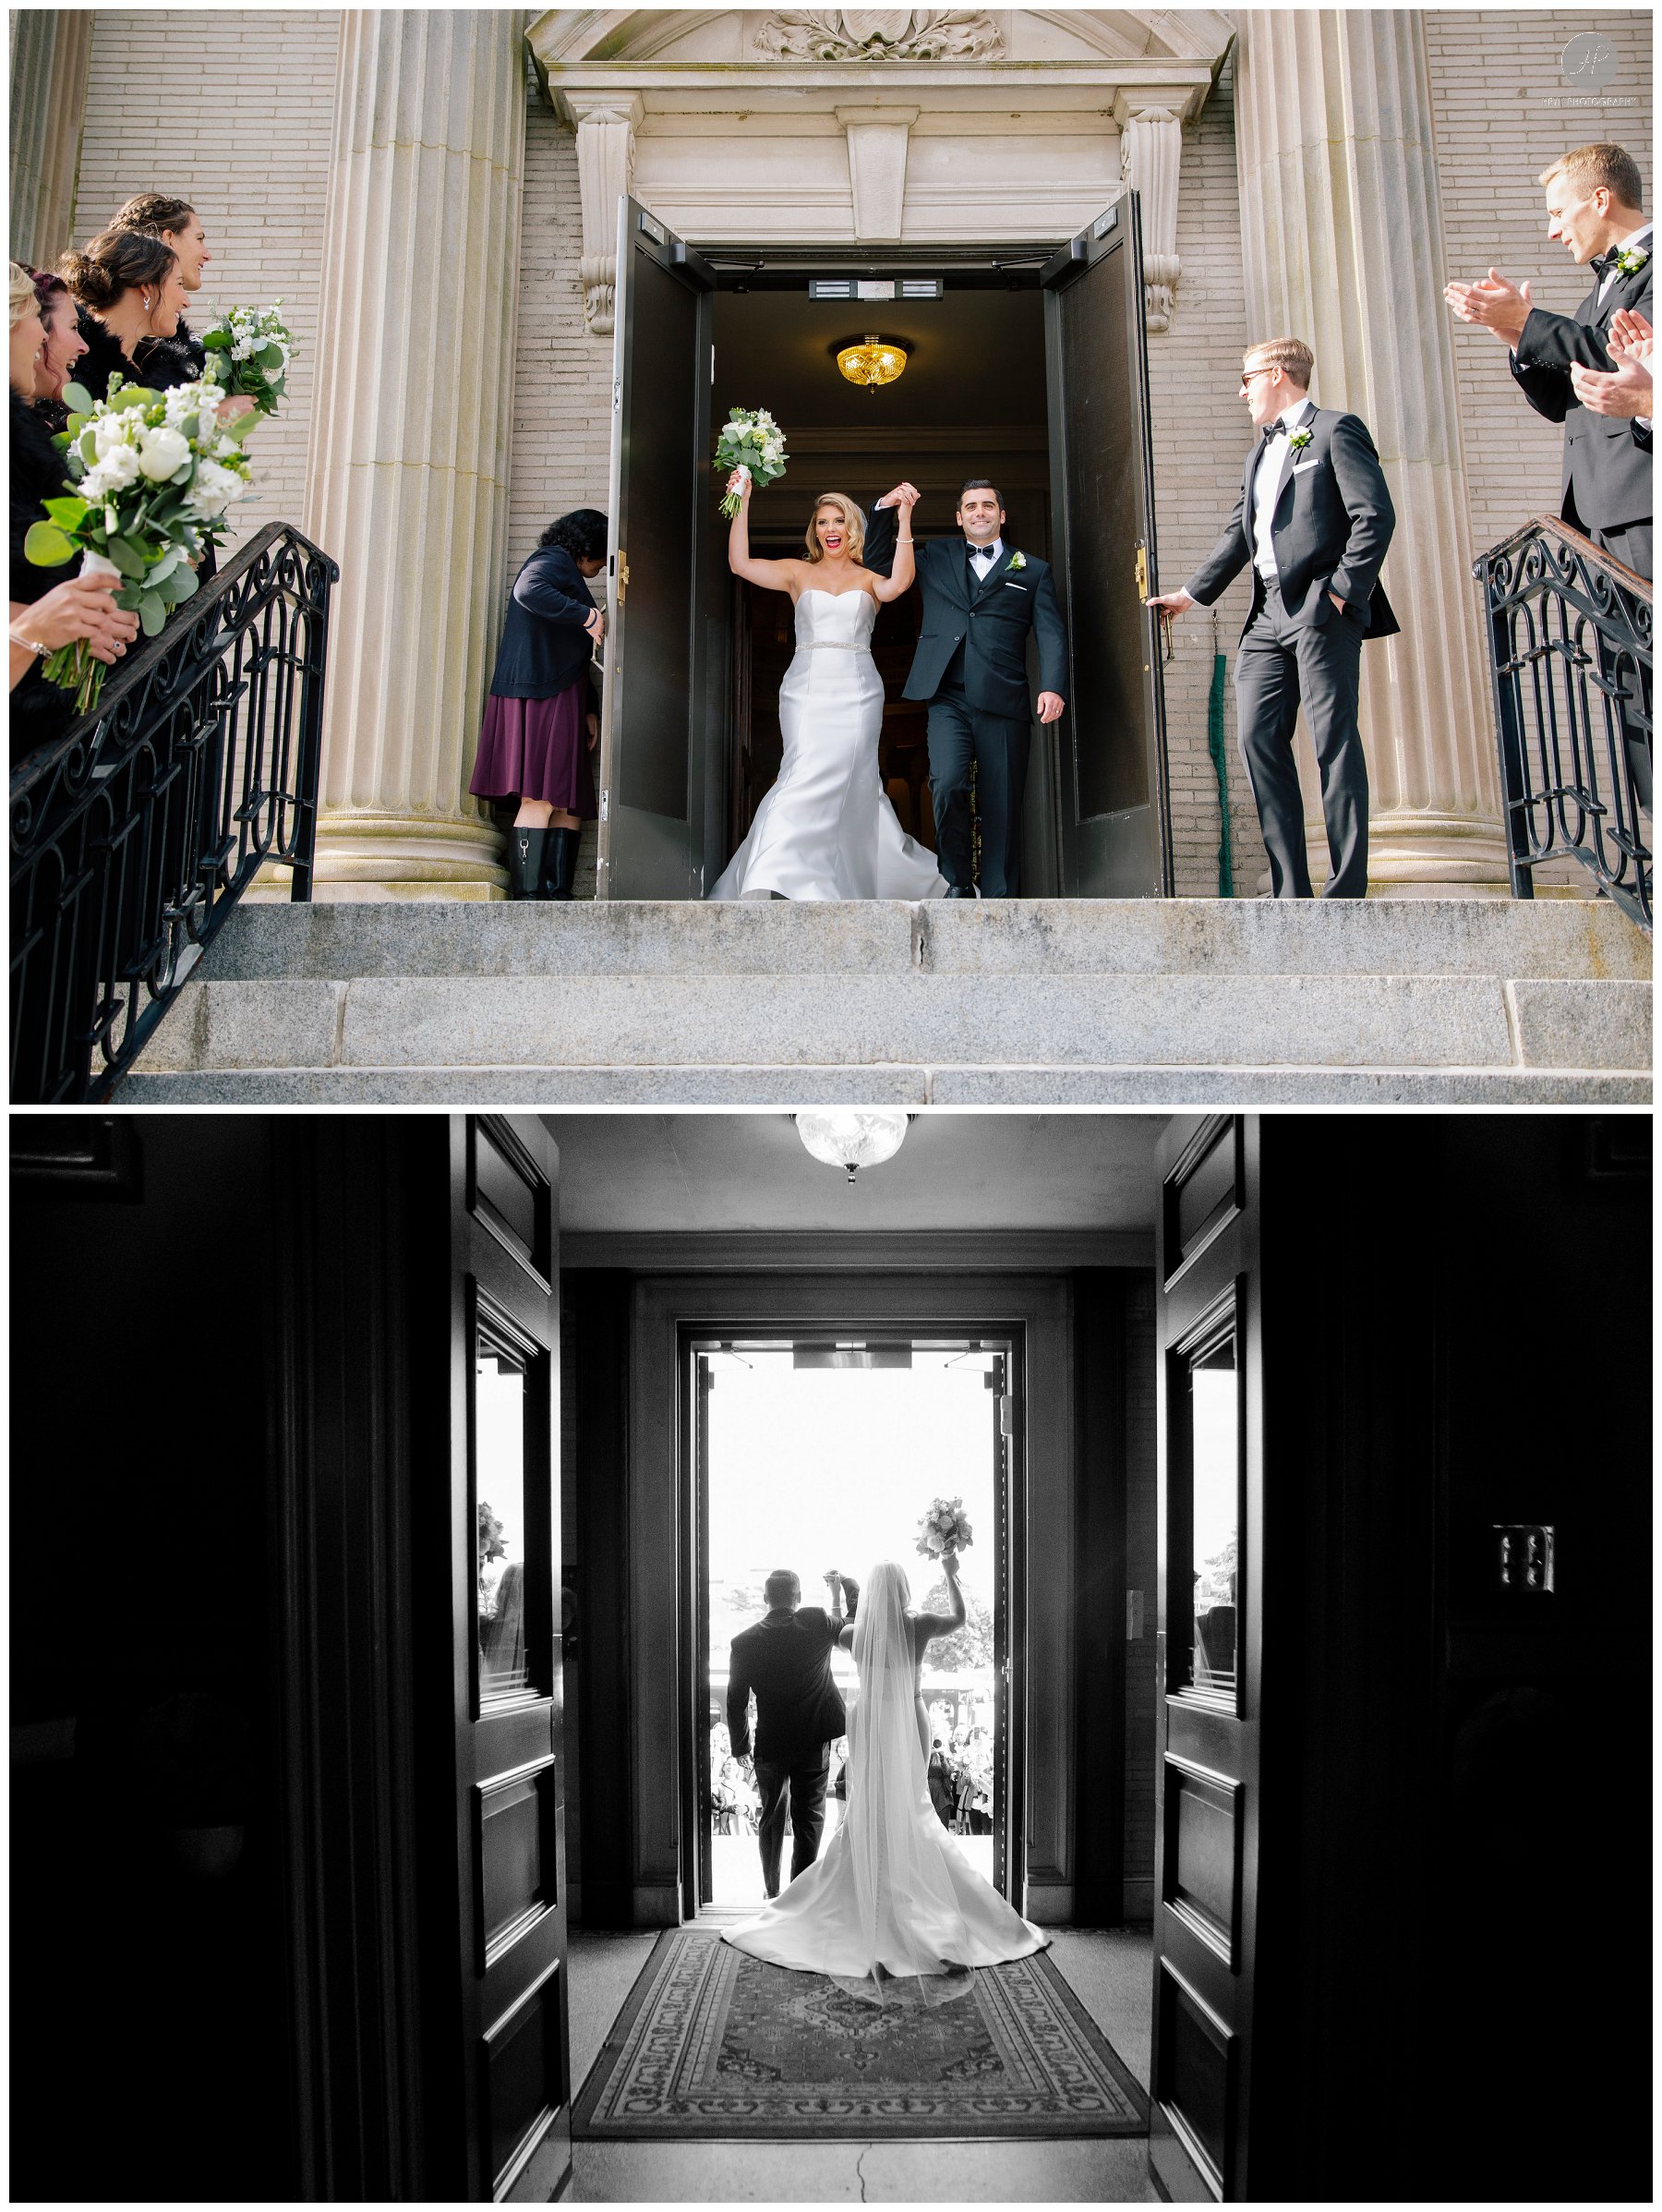 saint catharine church ceremony for spring lake bath and tennis club wedding in new jersey 